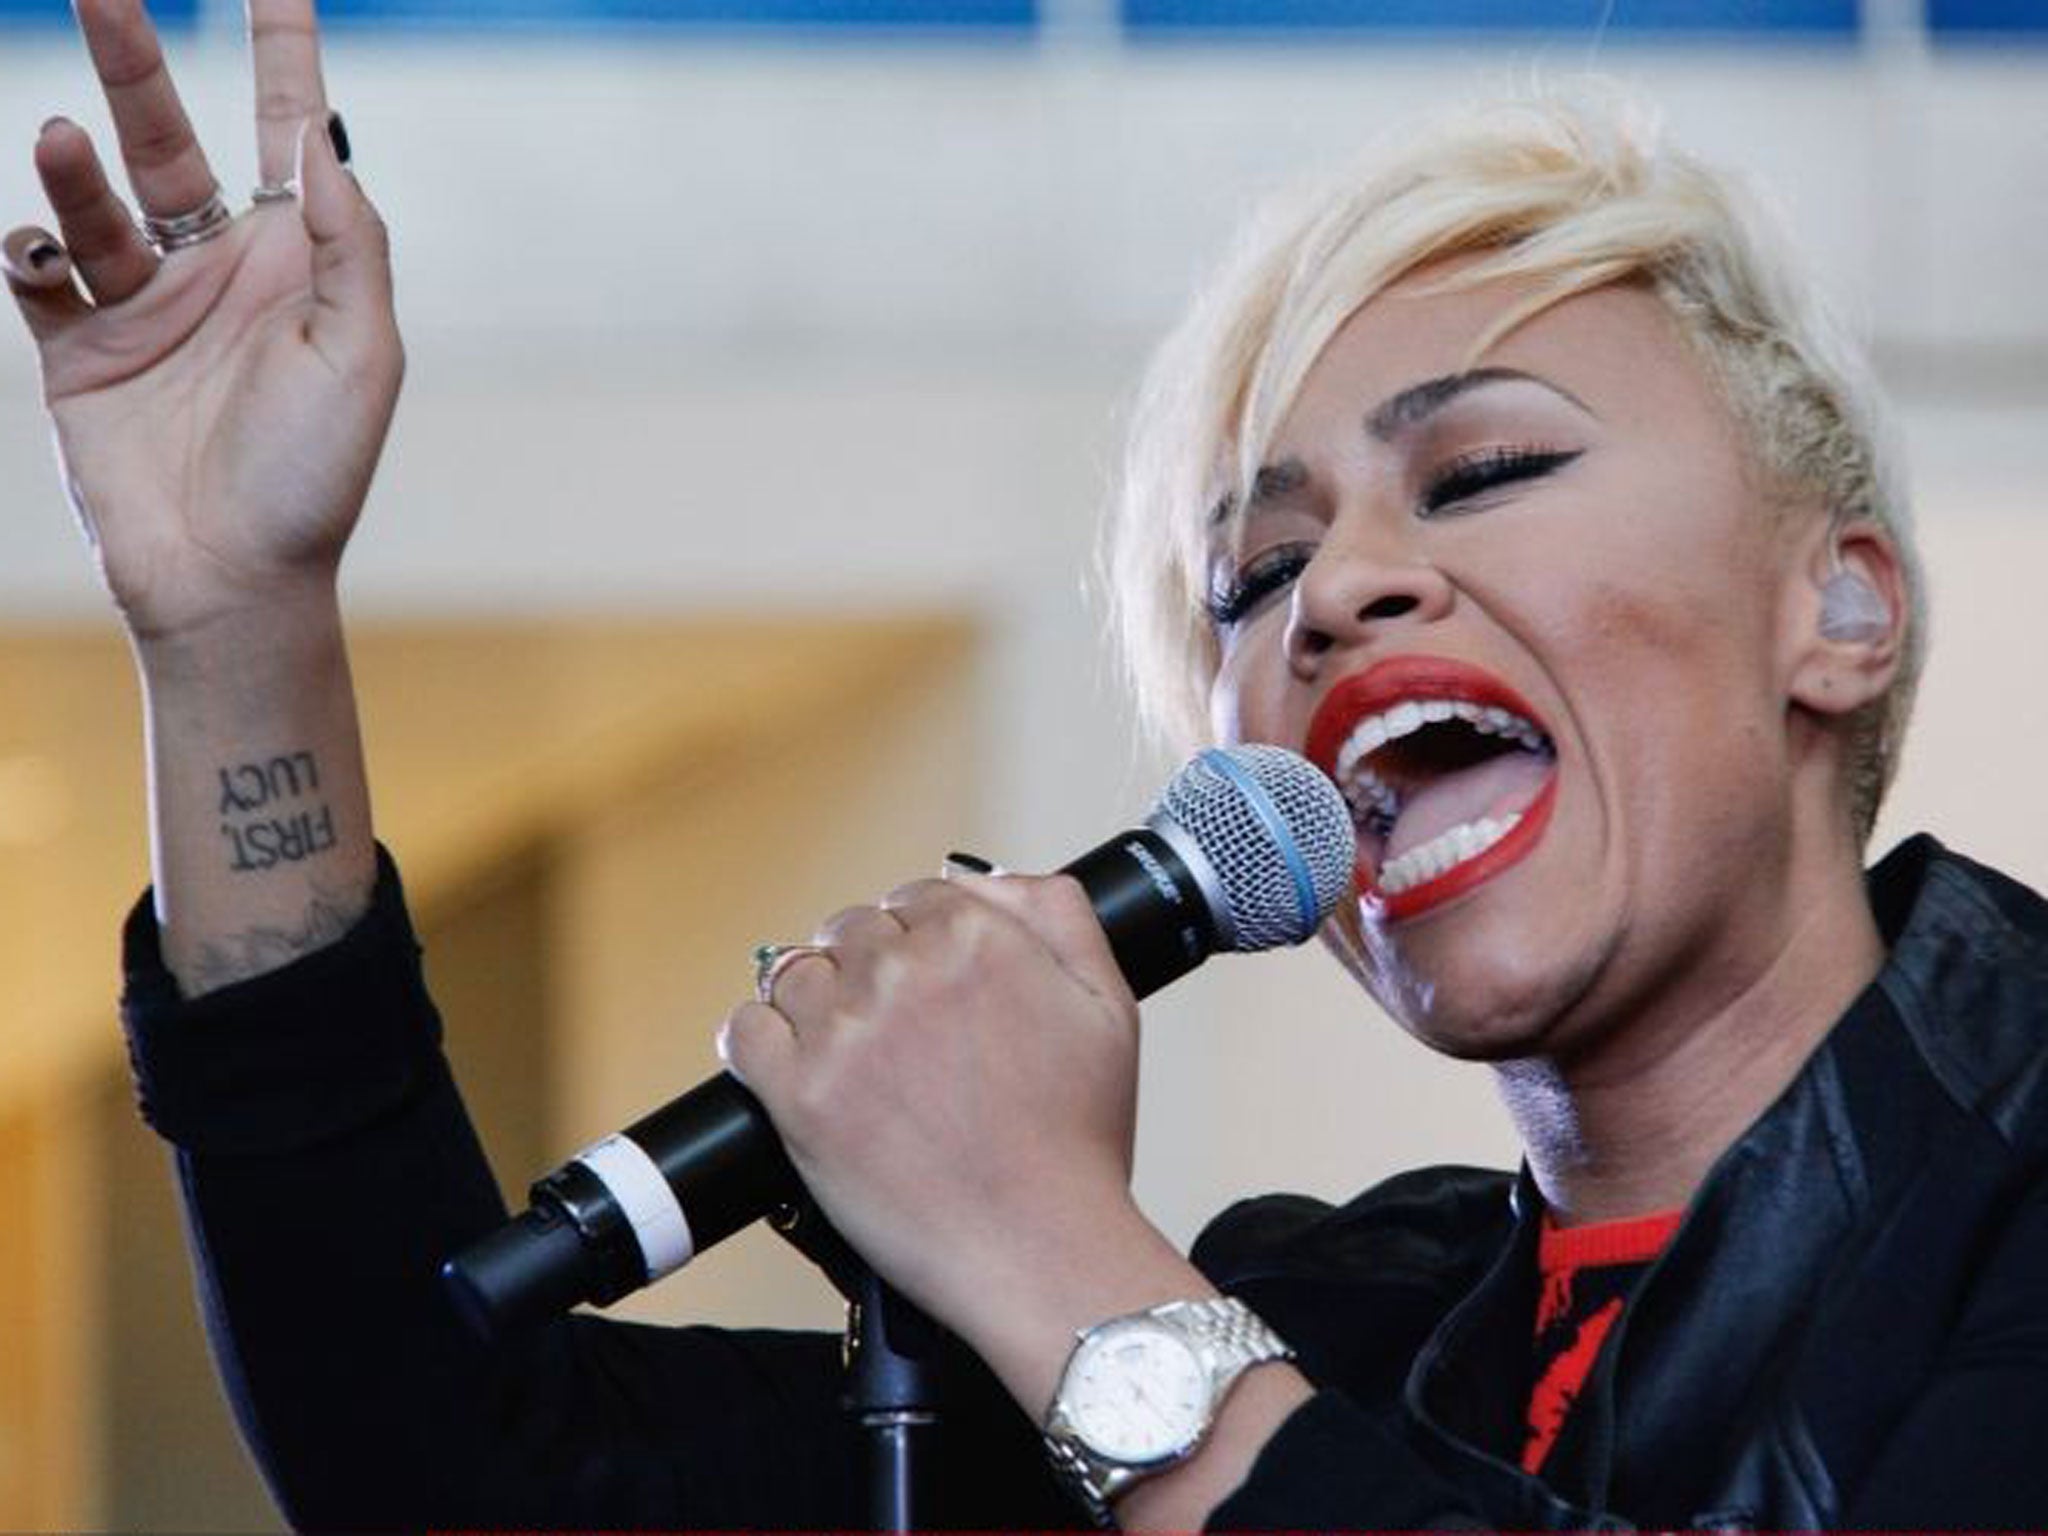 Emeli Sande's "Our Version of Events" became the debut album to spend more consecutive weeks in the top 10 than any other